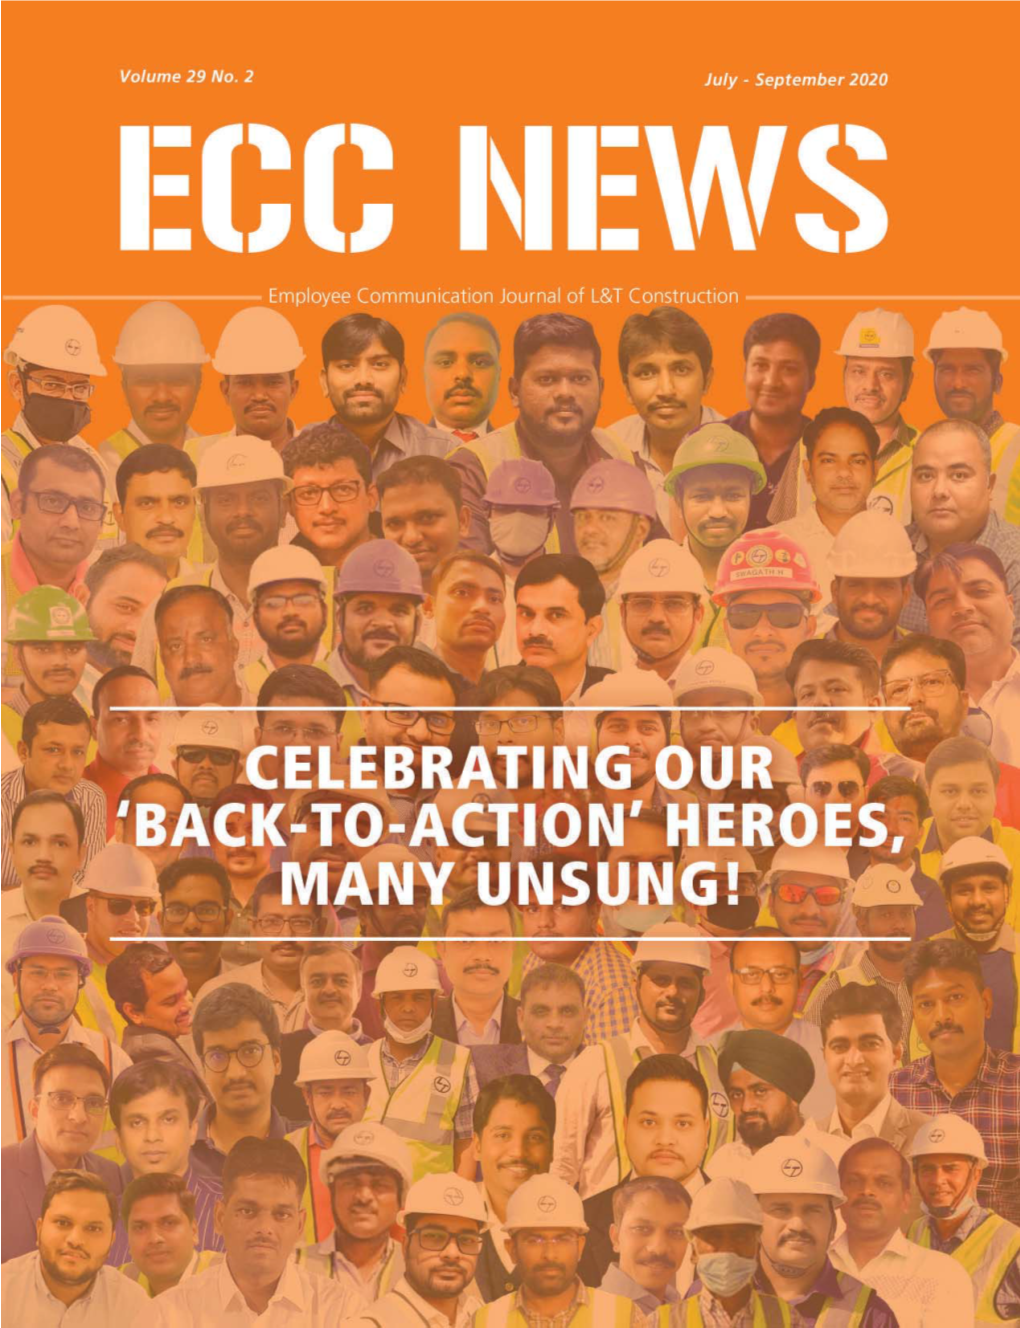 Celebrating Our 'Back-To-Action' Heroes, Many Unsung!